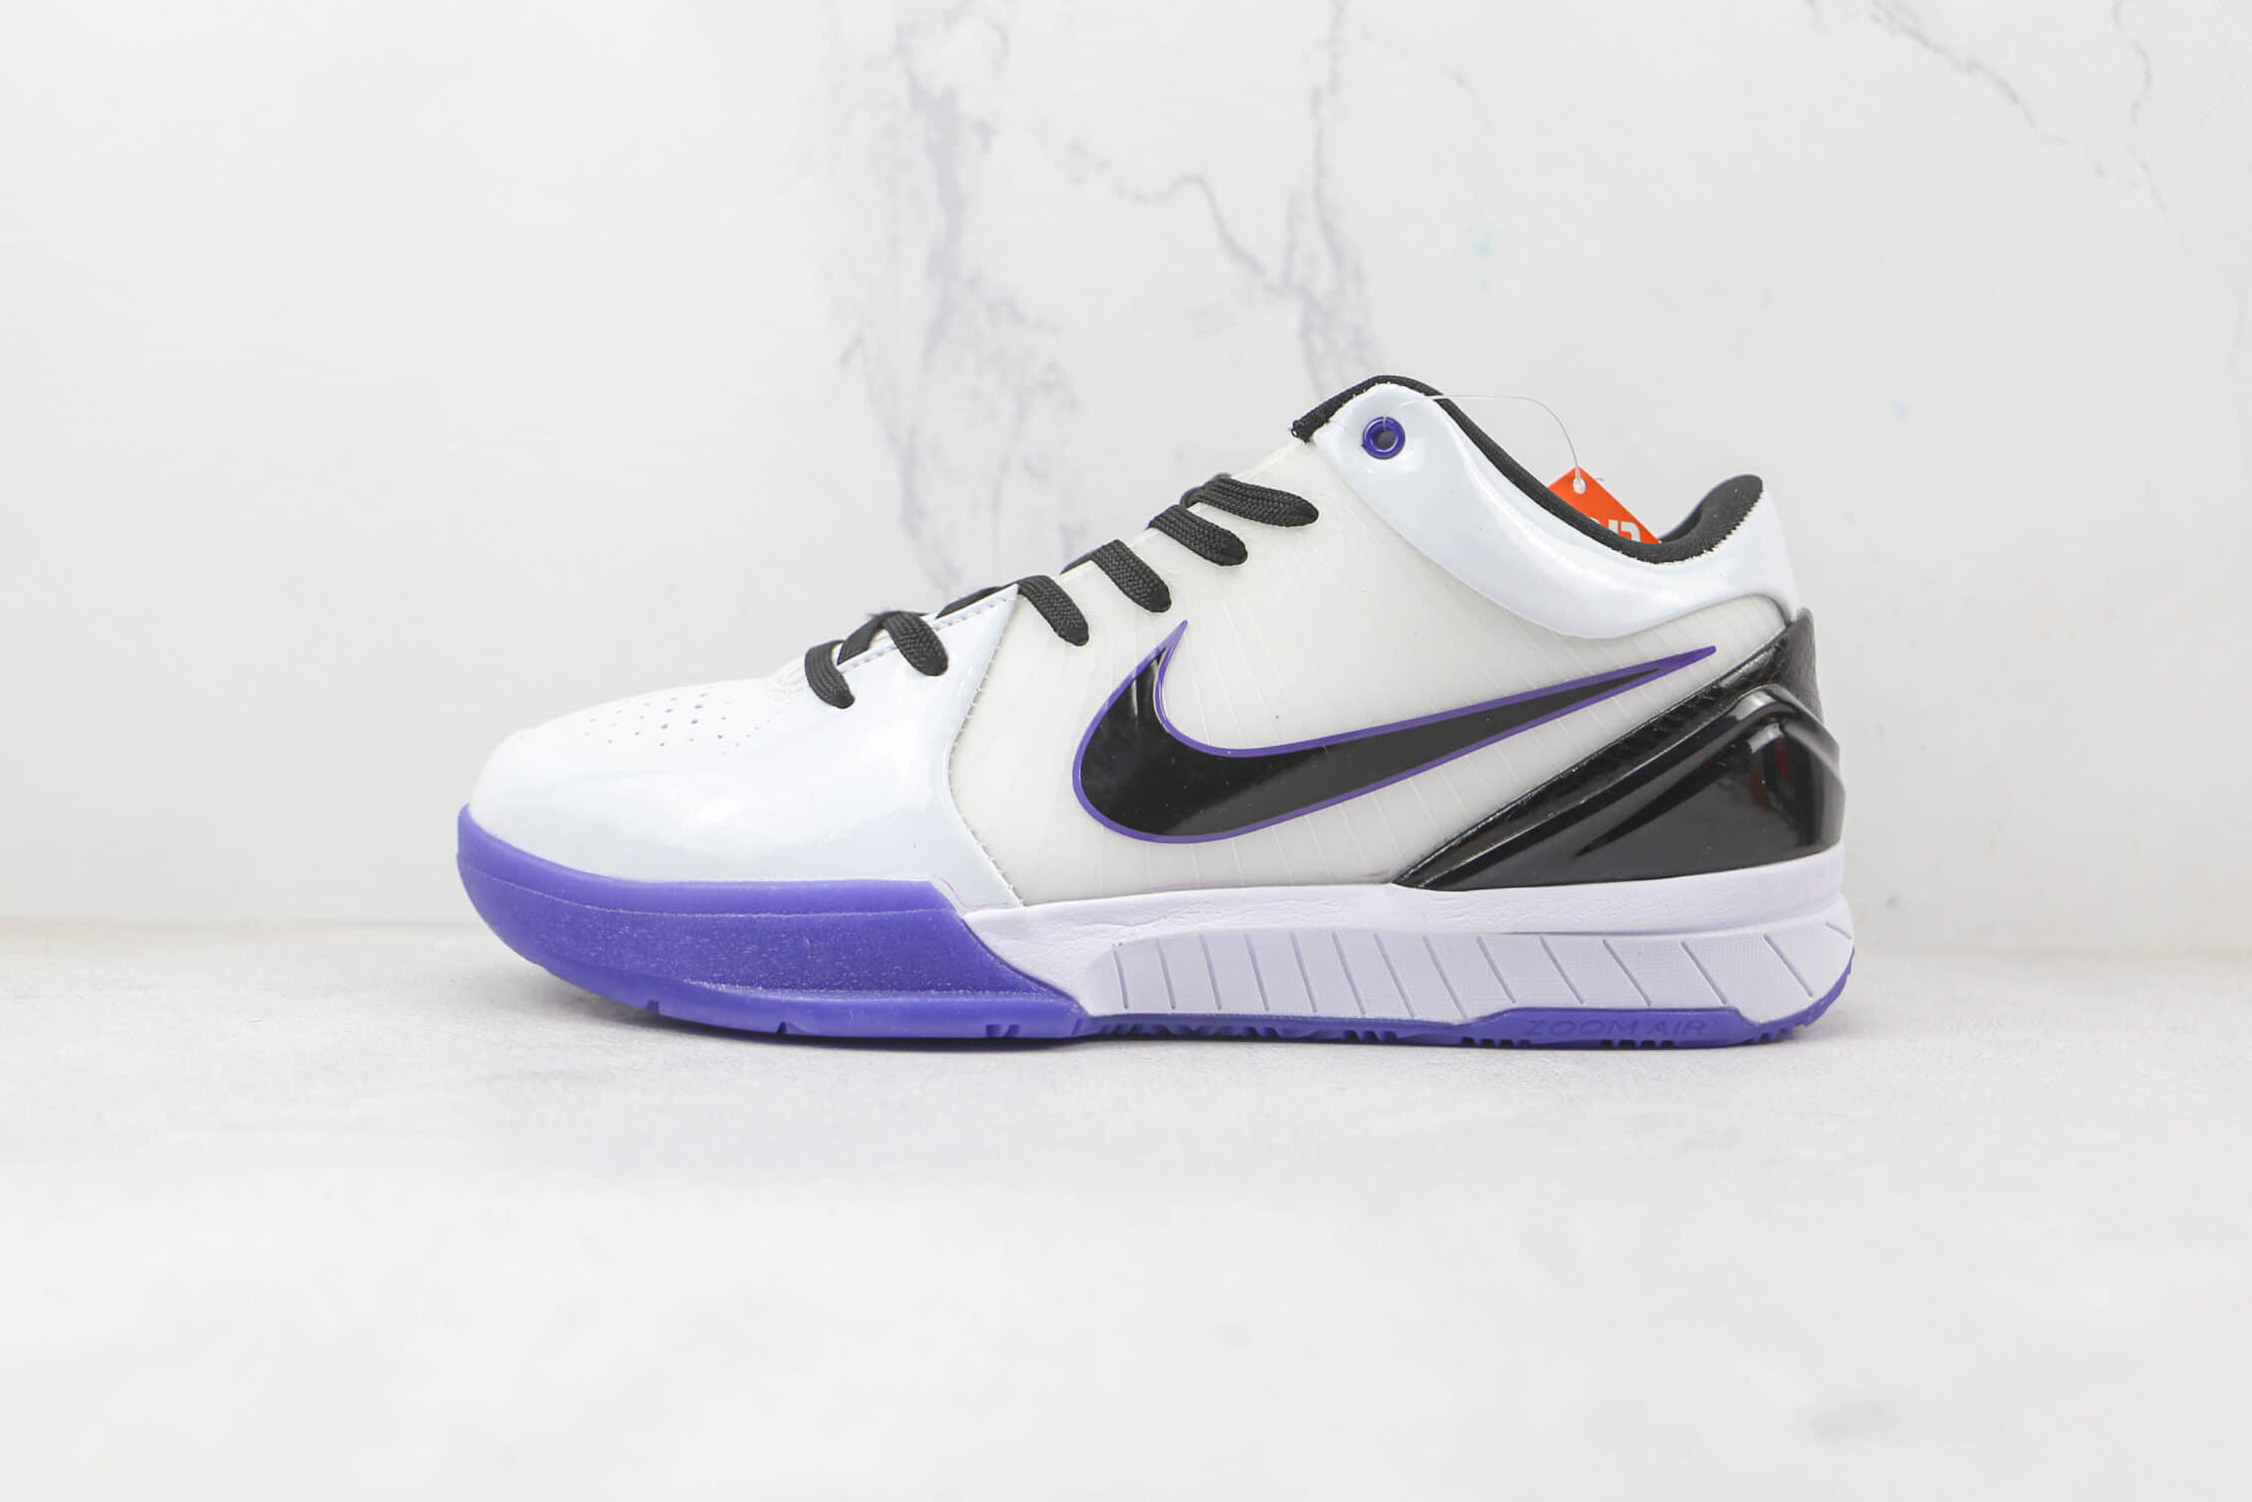 Nike Zoom Kobe 4 'Inline' 344335-101 - Shop Now for Classic Performance Shoes